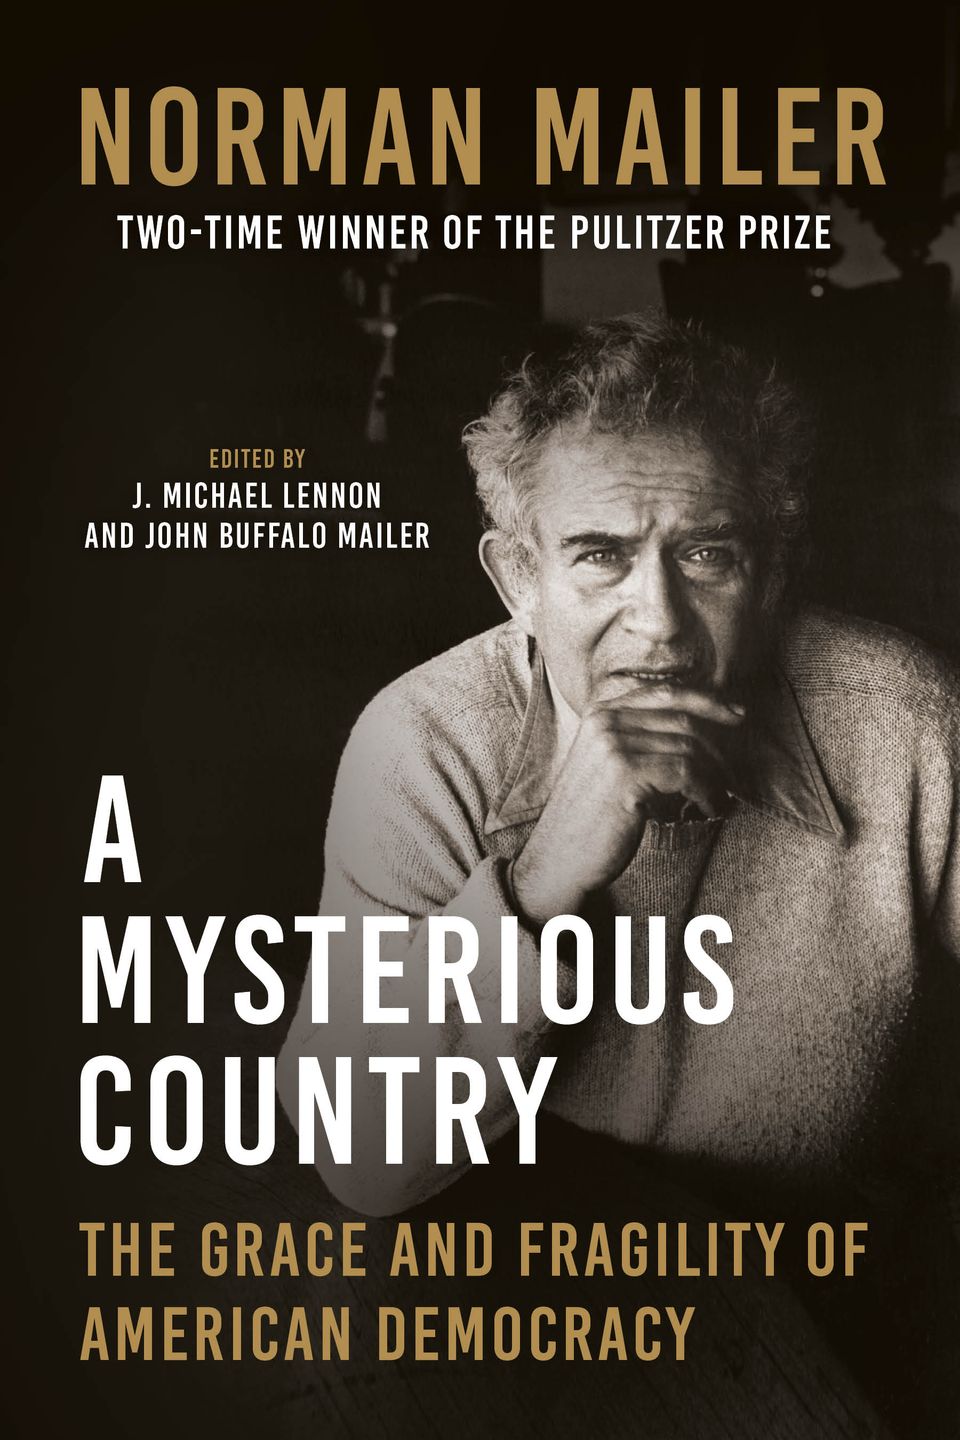 Out Tomorrow: A Mysterious Country